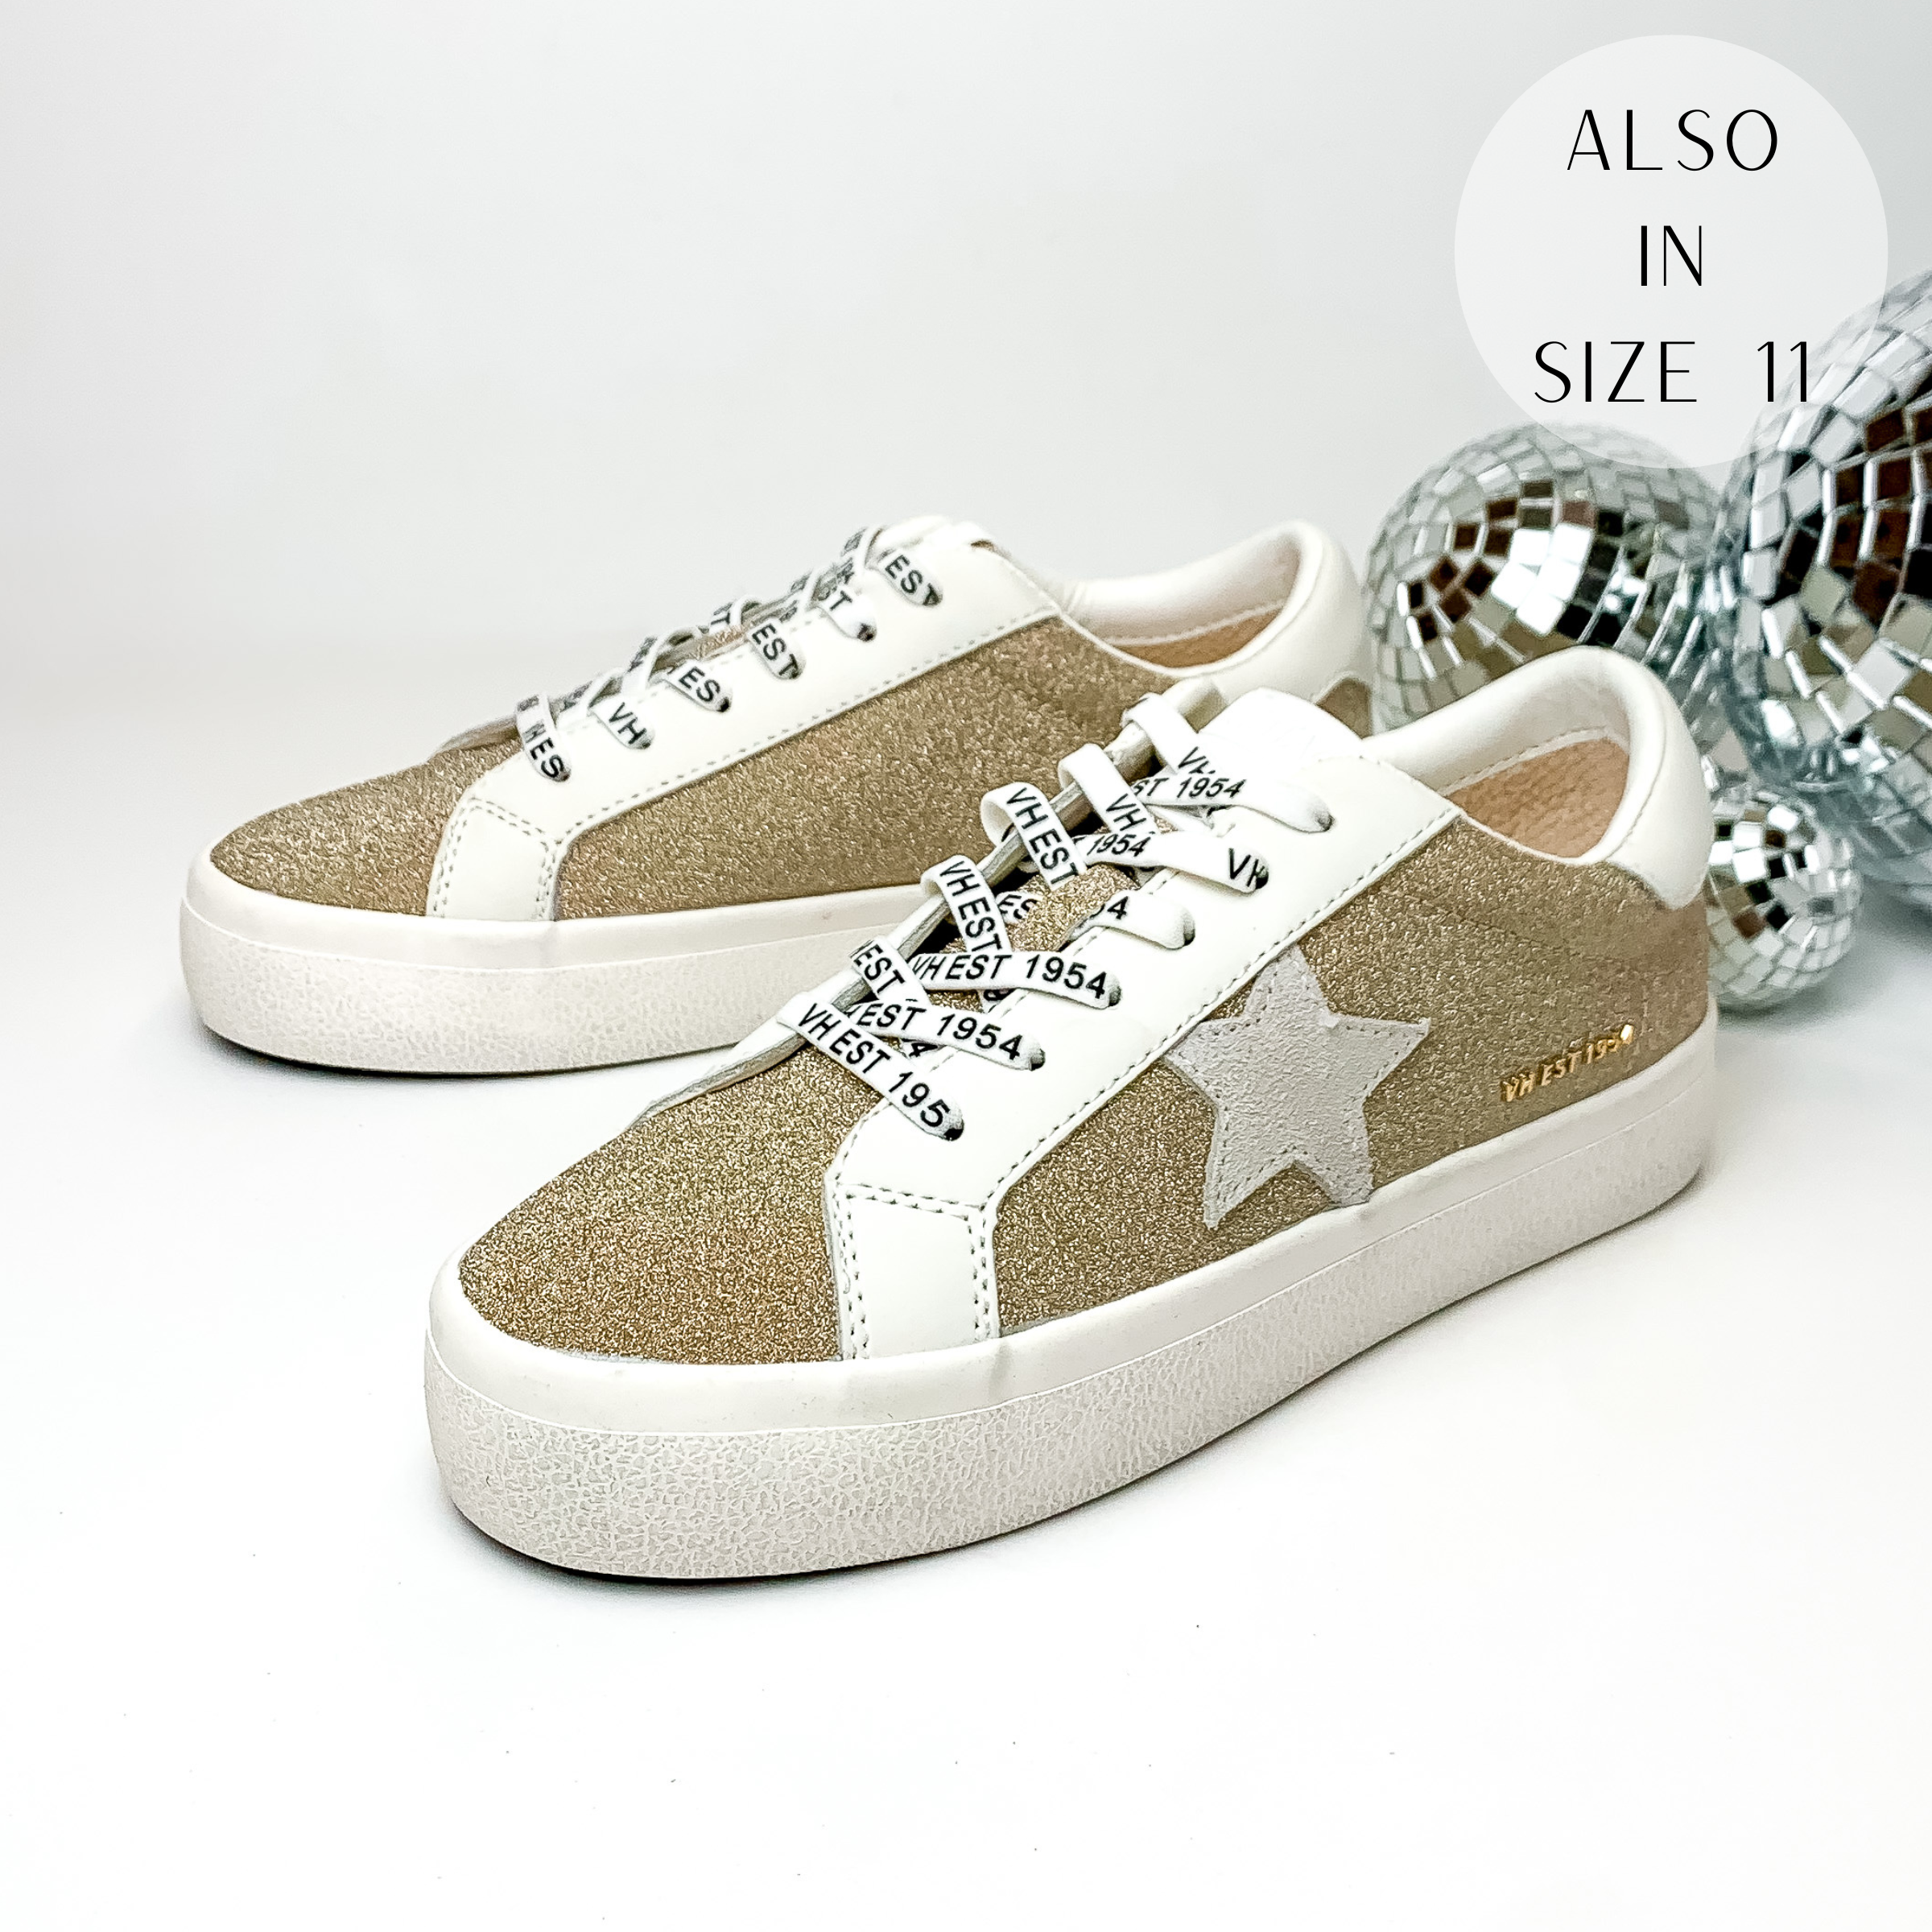 Pitured are white tennis shoes with a light gold, sparkle inlay, and a grey star emblem. These shoes are pictured on a white background with disco balls behind them.